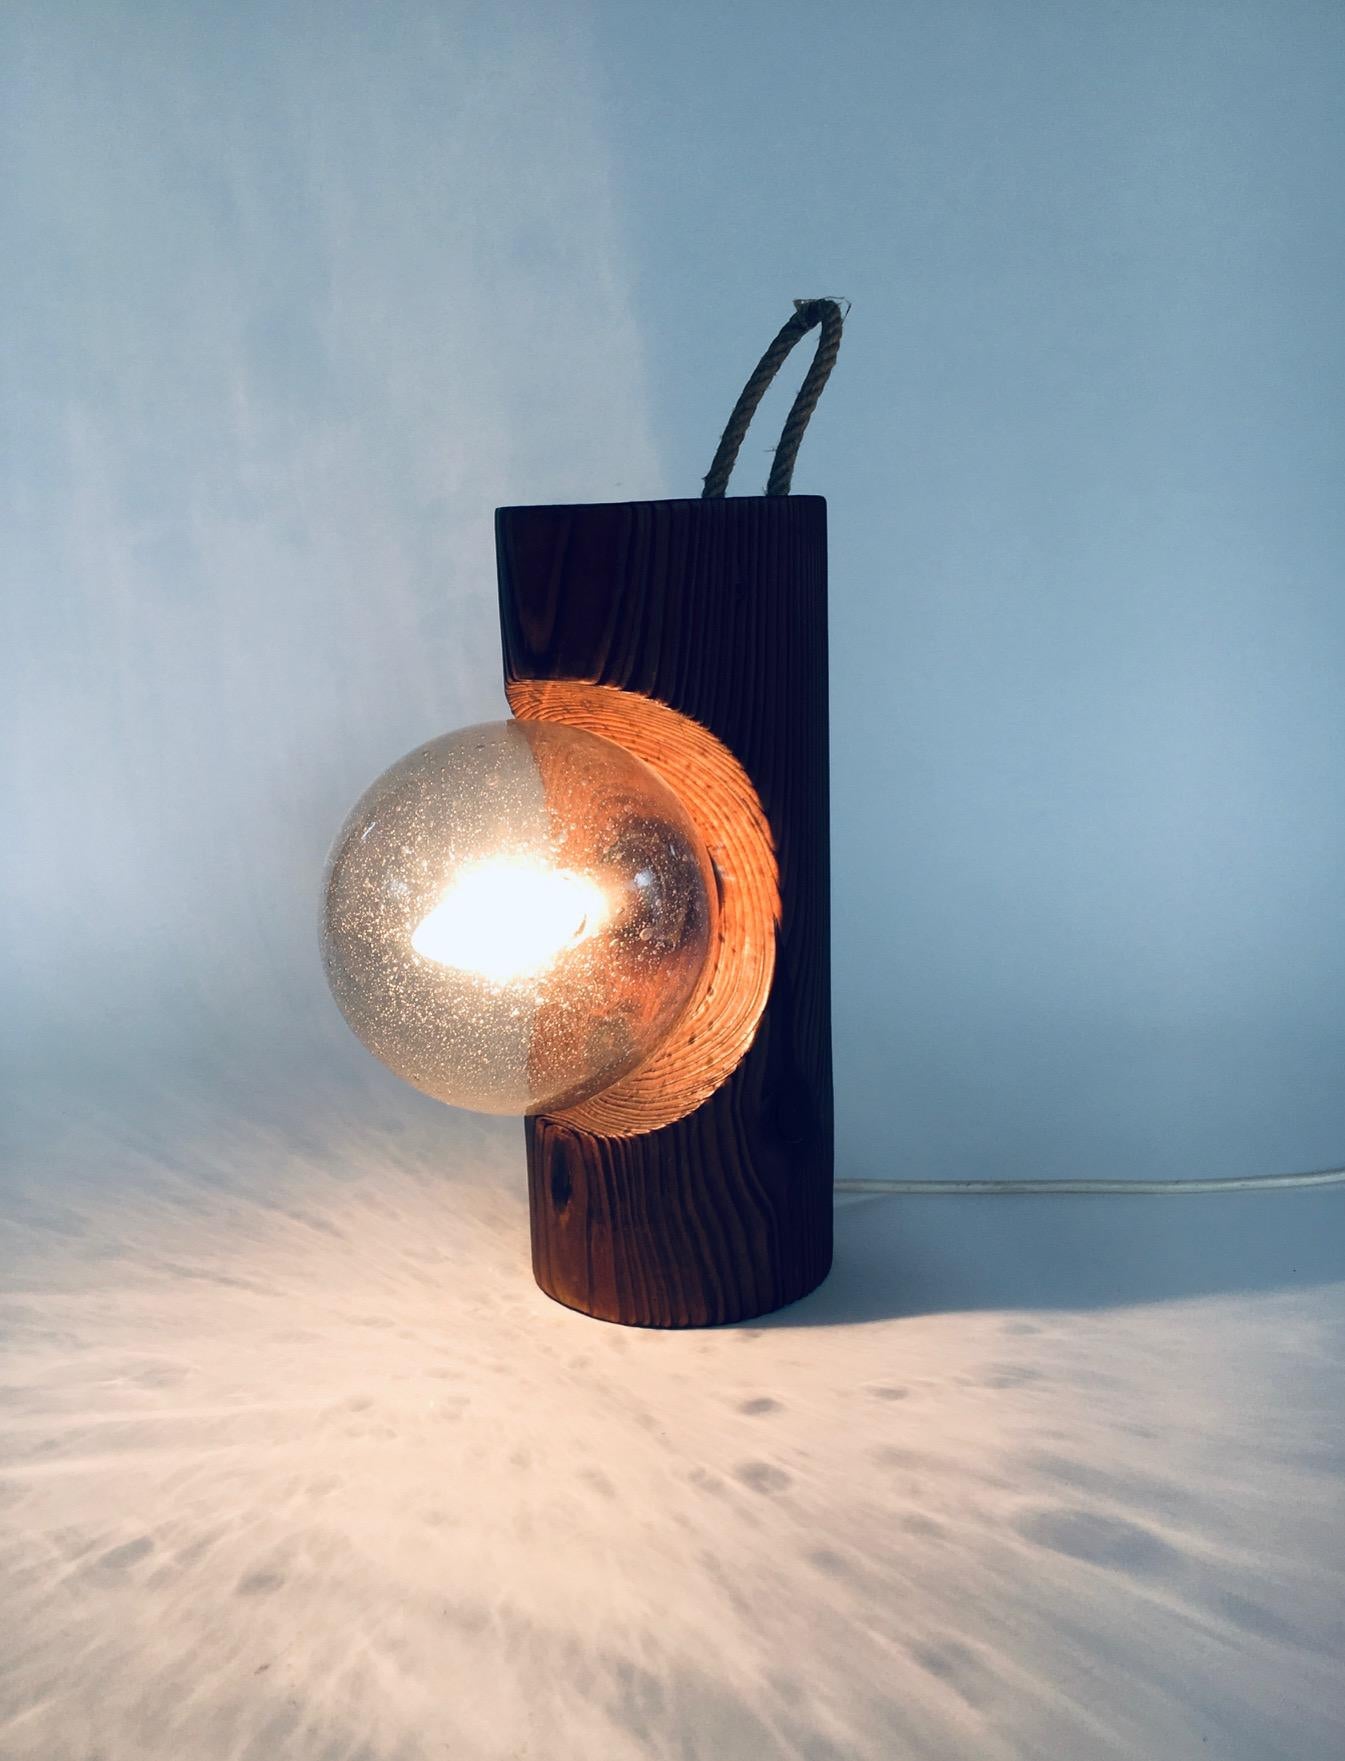 Vintage Brutalist Design Wood & Glass Table or Wall Lamp by Temde Leuchten. Made in Switzerland, 1960's period. Pine wood log with handblown bubble glass ball and rope handle. This can be used as a table lamp or hung on the wall, as the back is